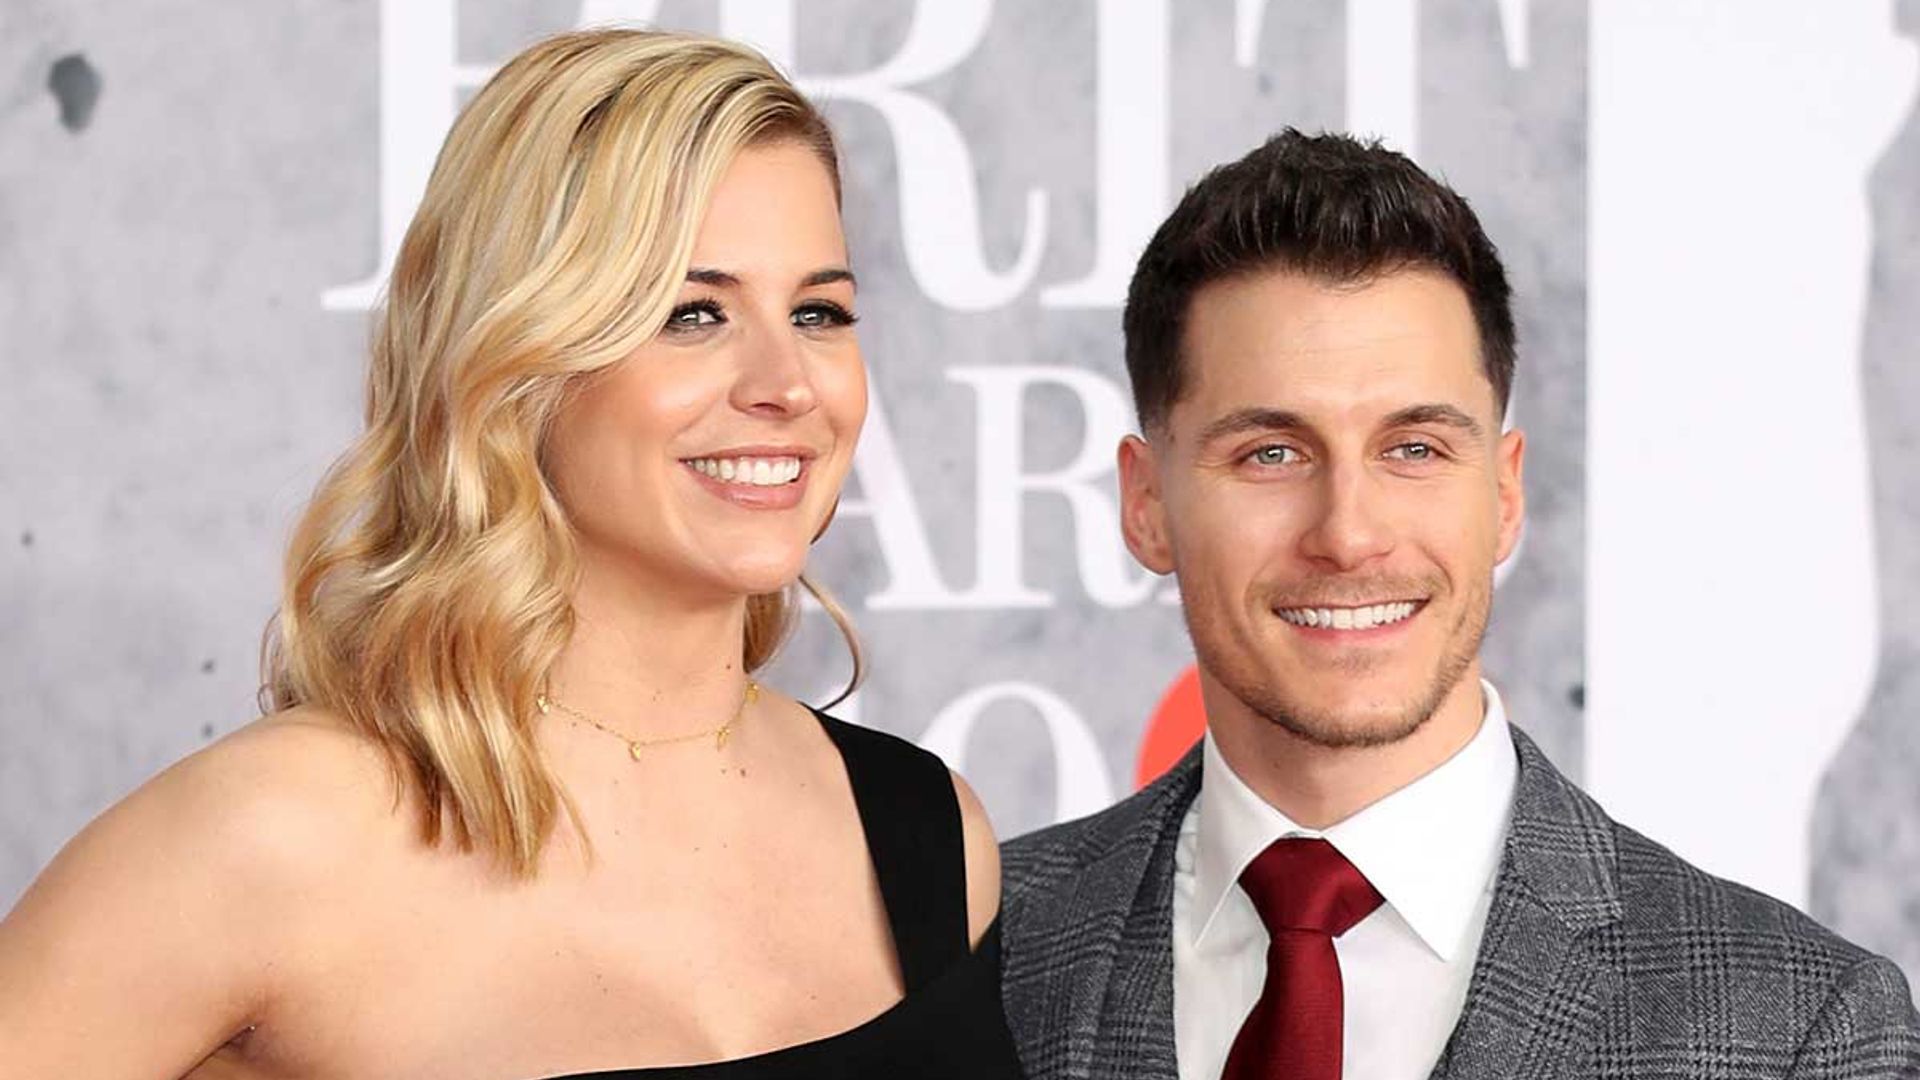 Why pregnant Gemma Atkinson and Strictly's Gorka Marquez won't marry ...